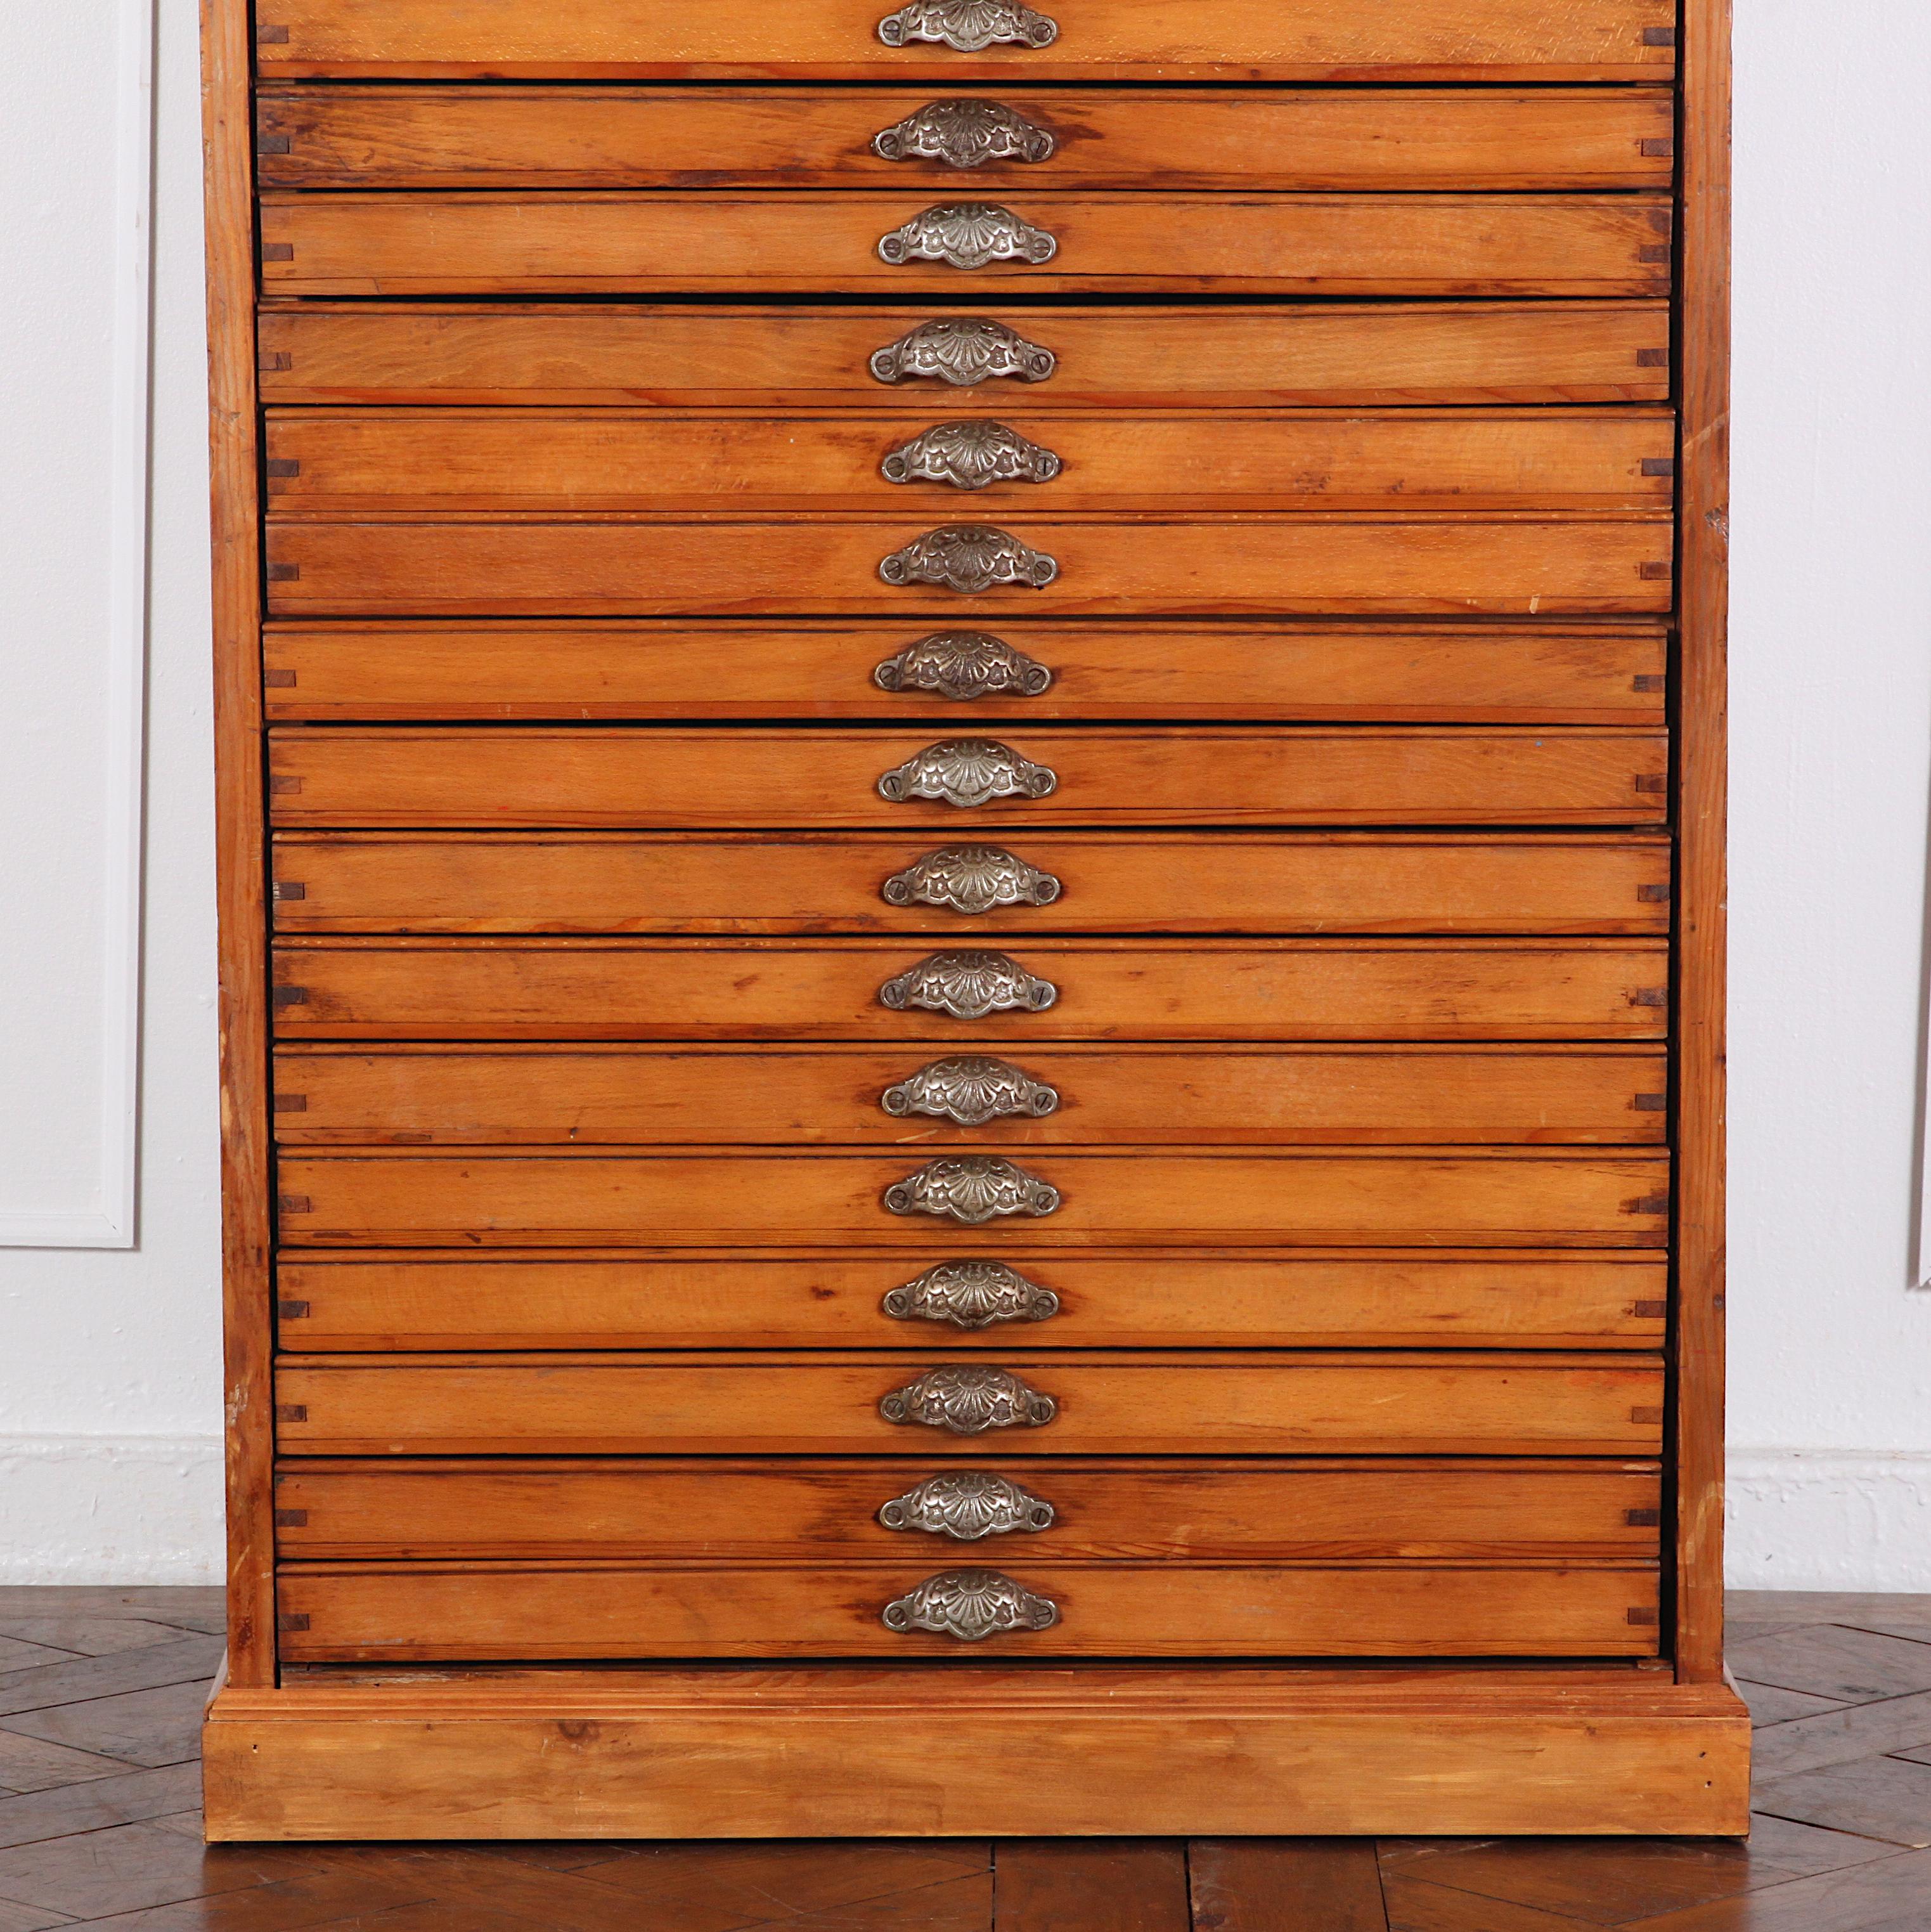 Early 20th Century Late 19th Century French Industrial Style Mulit Drawer Map or Document Chest